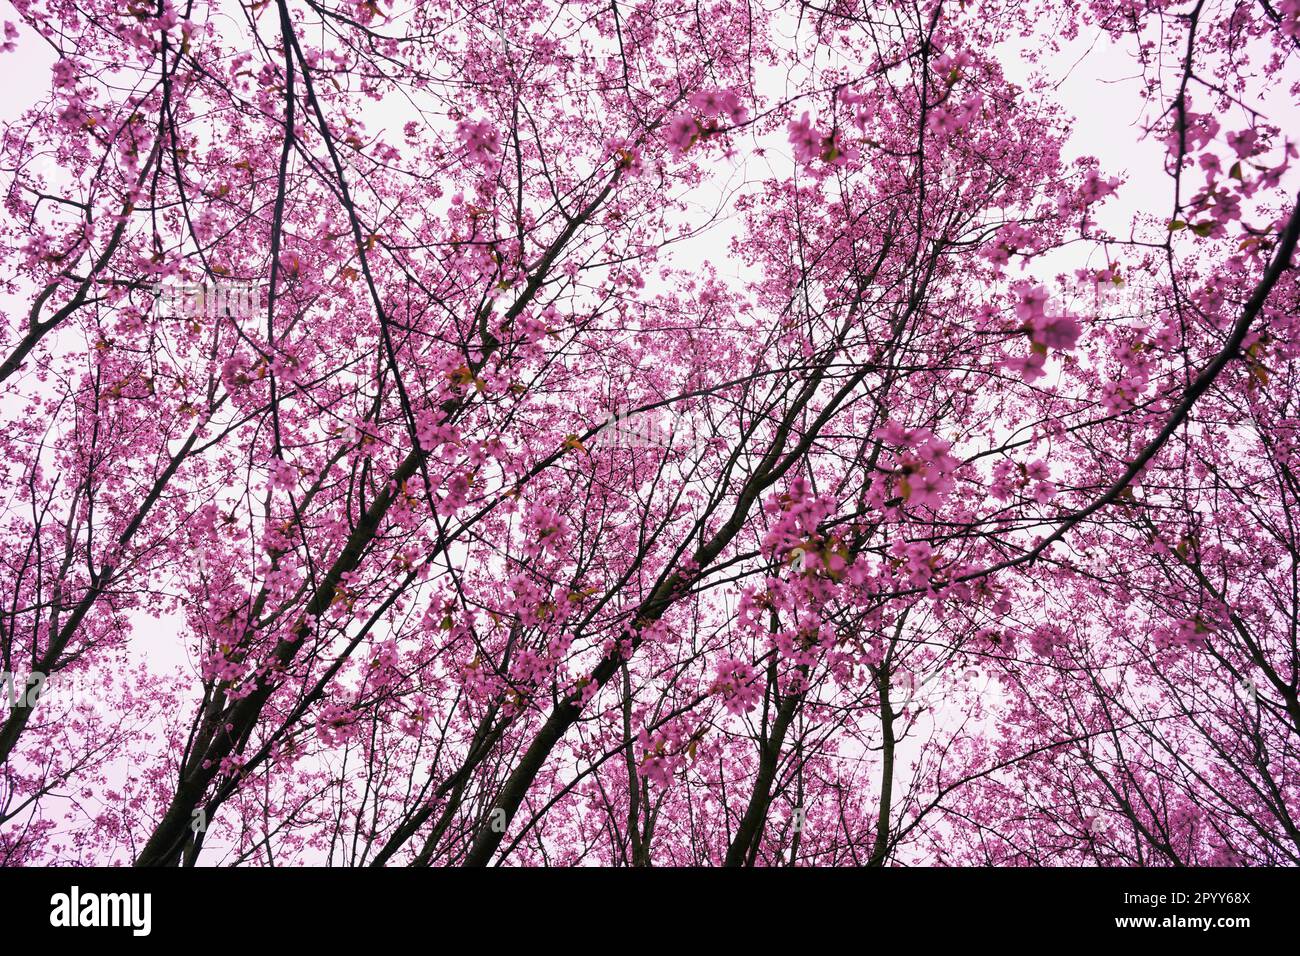 Cherry Blossom Spectacle at Gardens of The World, Berlin Stock Photo